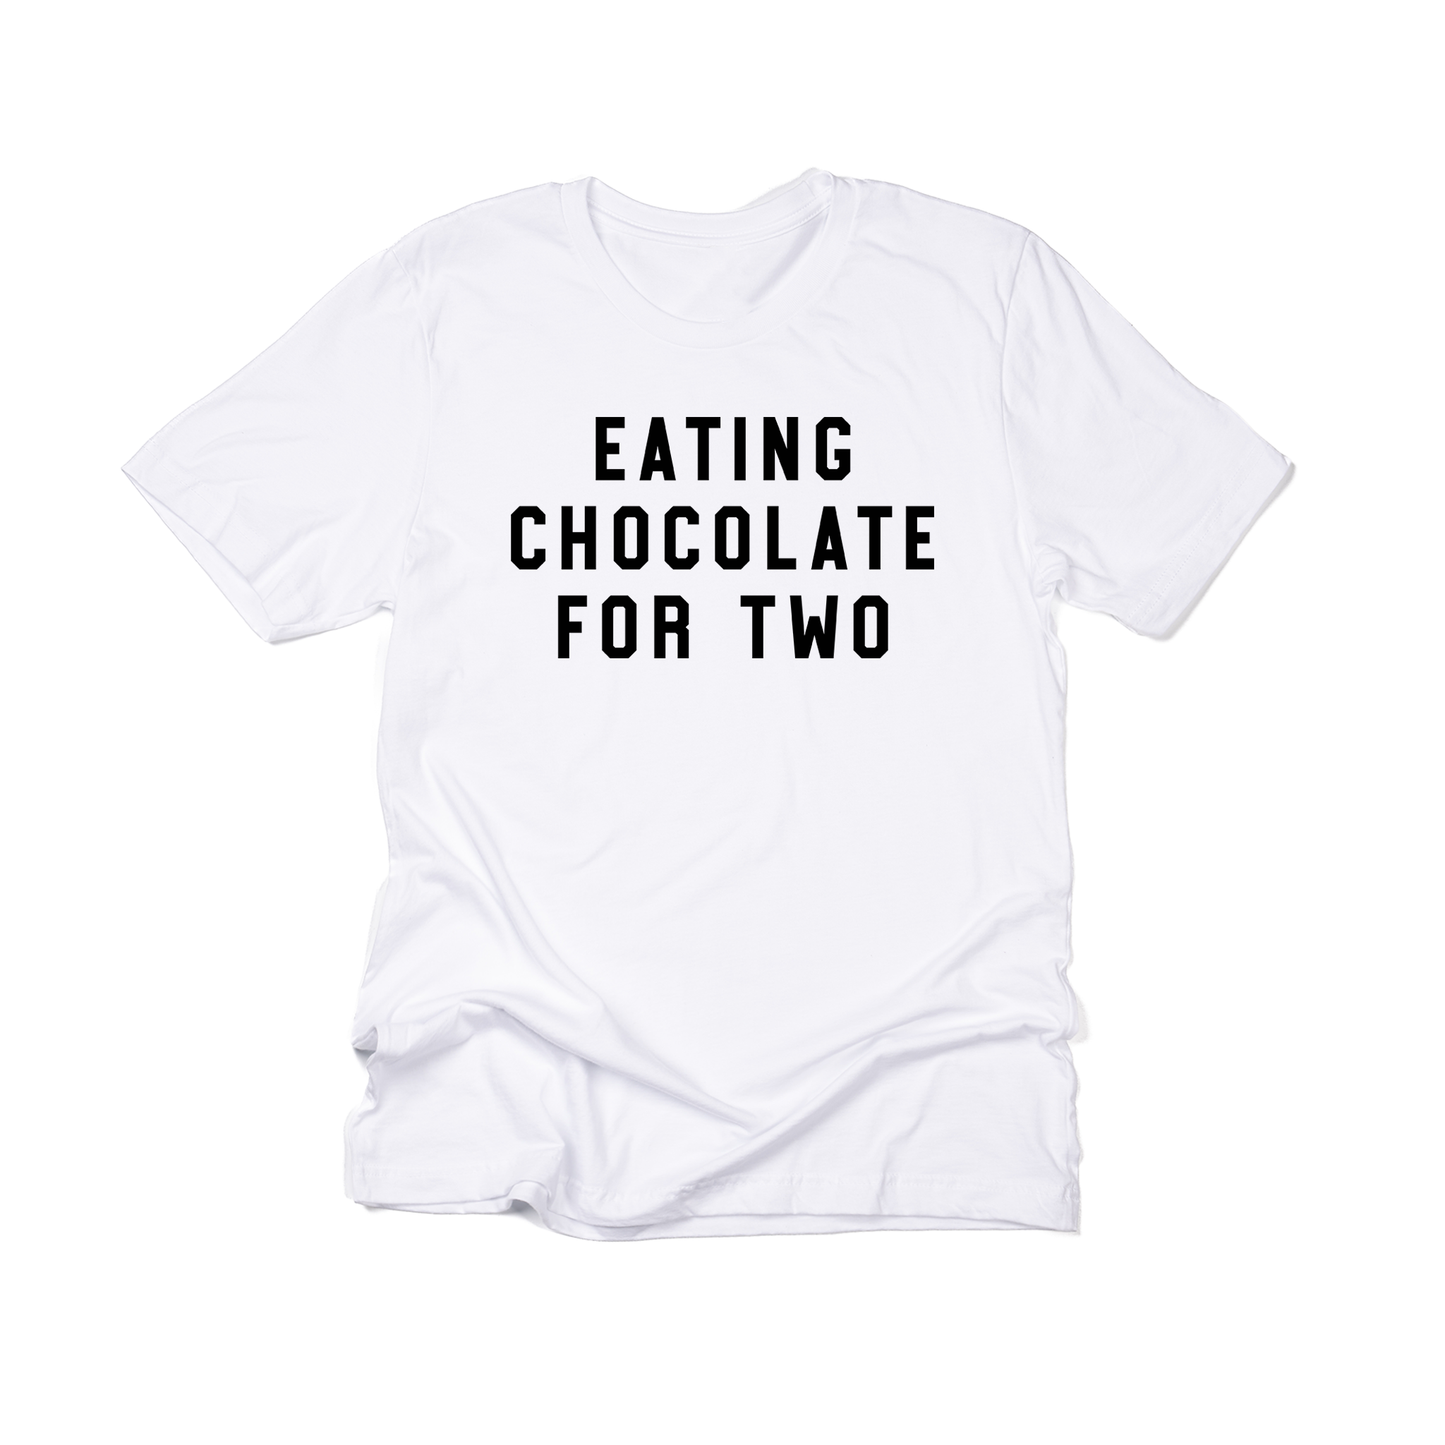 Eating Chocolate for Two (Black) - Tee (White)